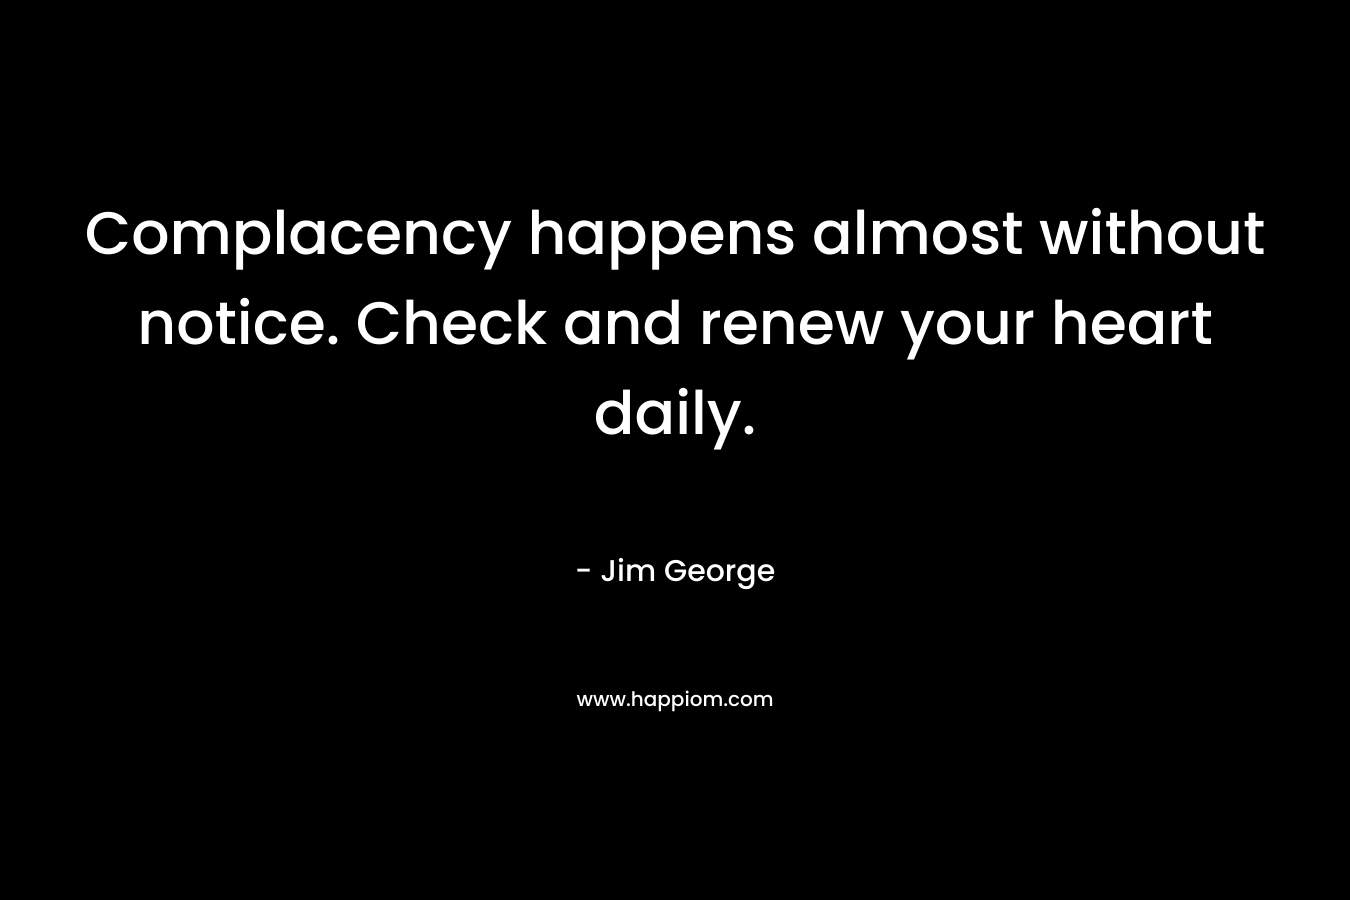 Complacency happens almost without notice. Check and renew your heart daily.